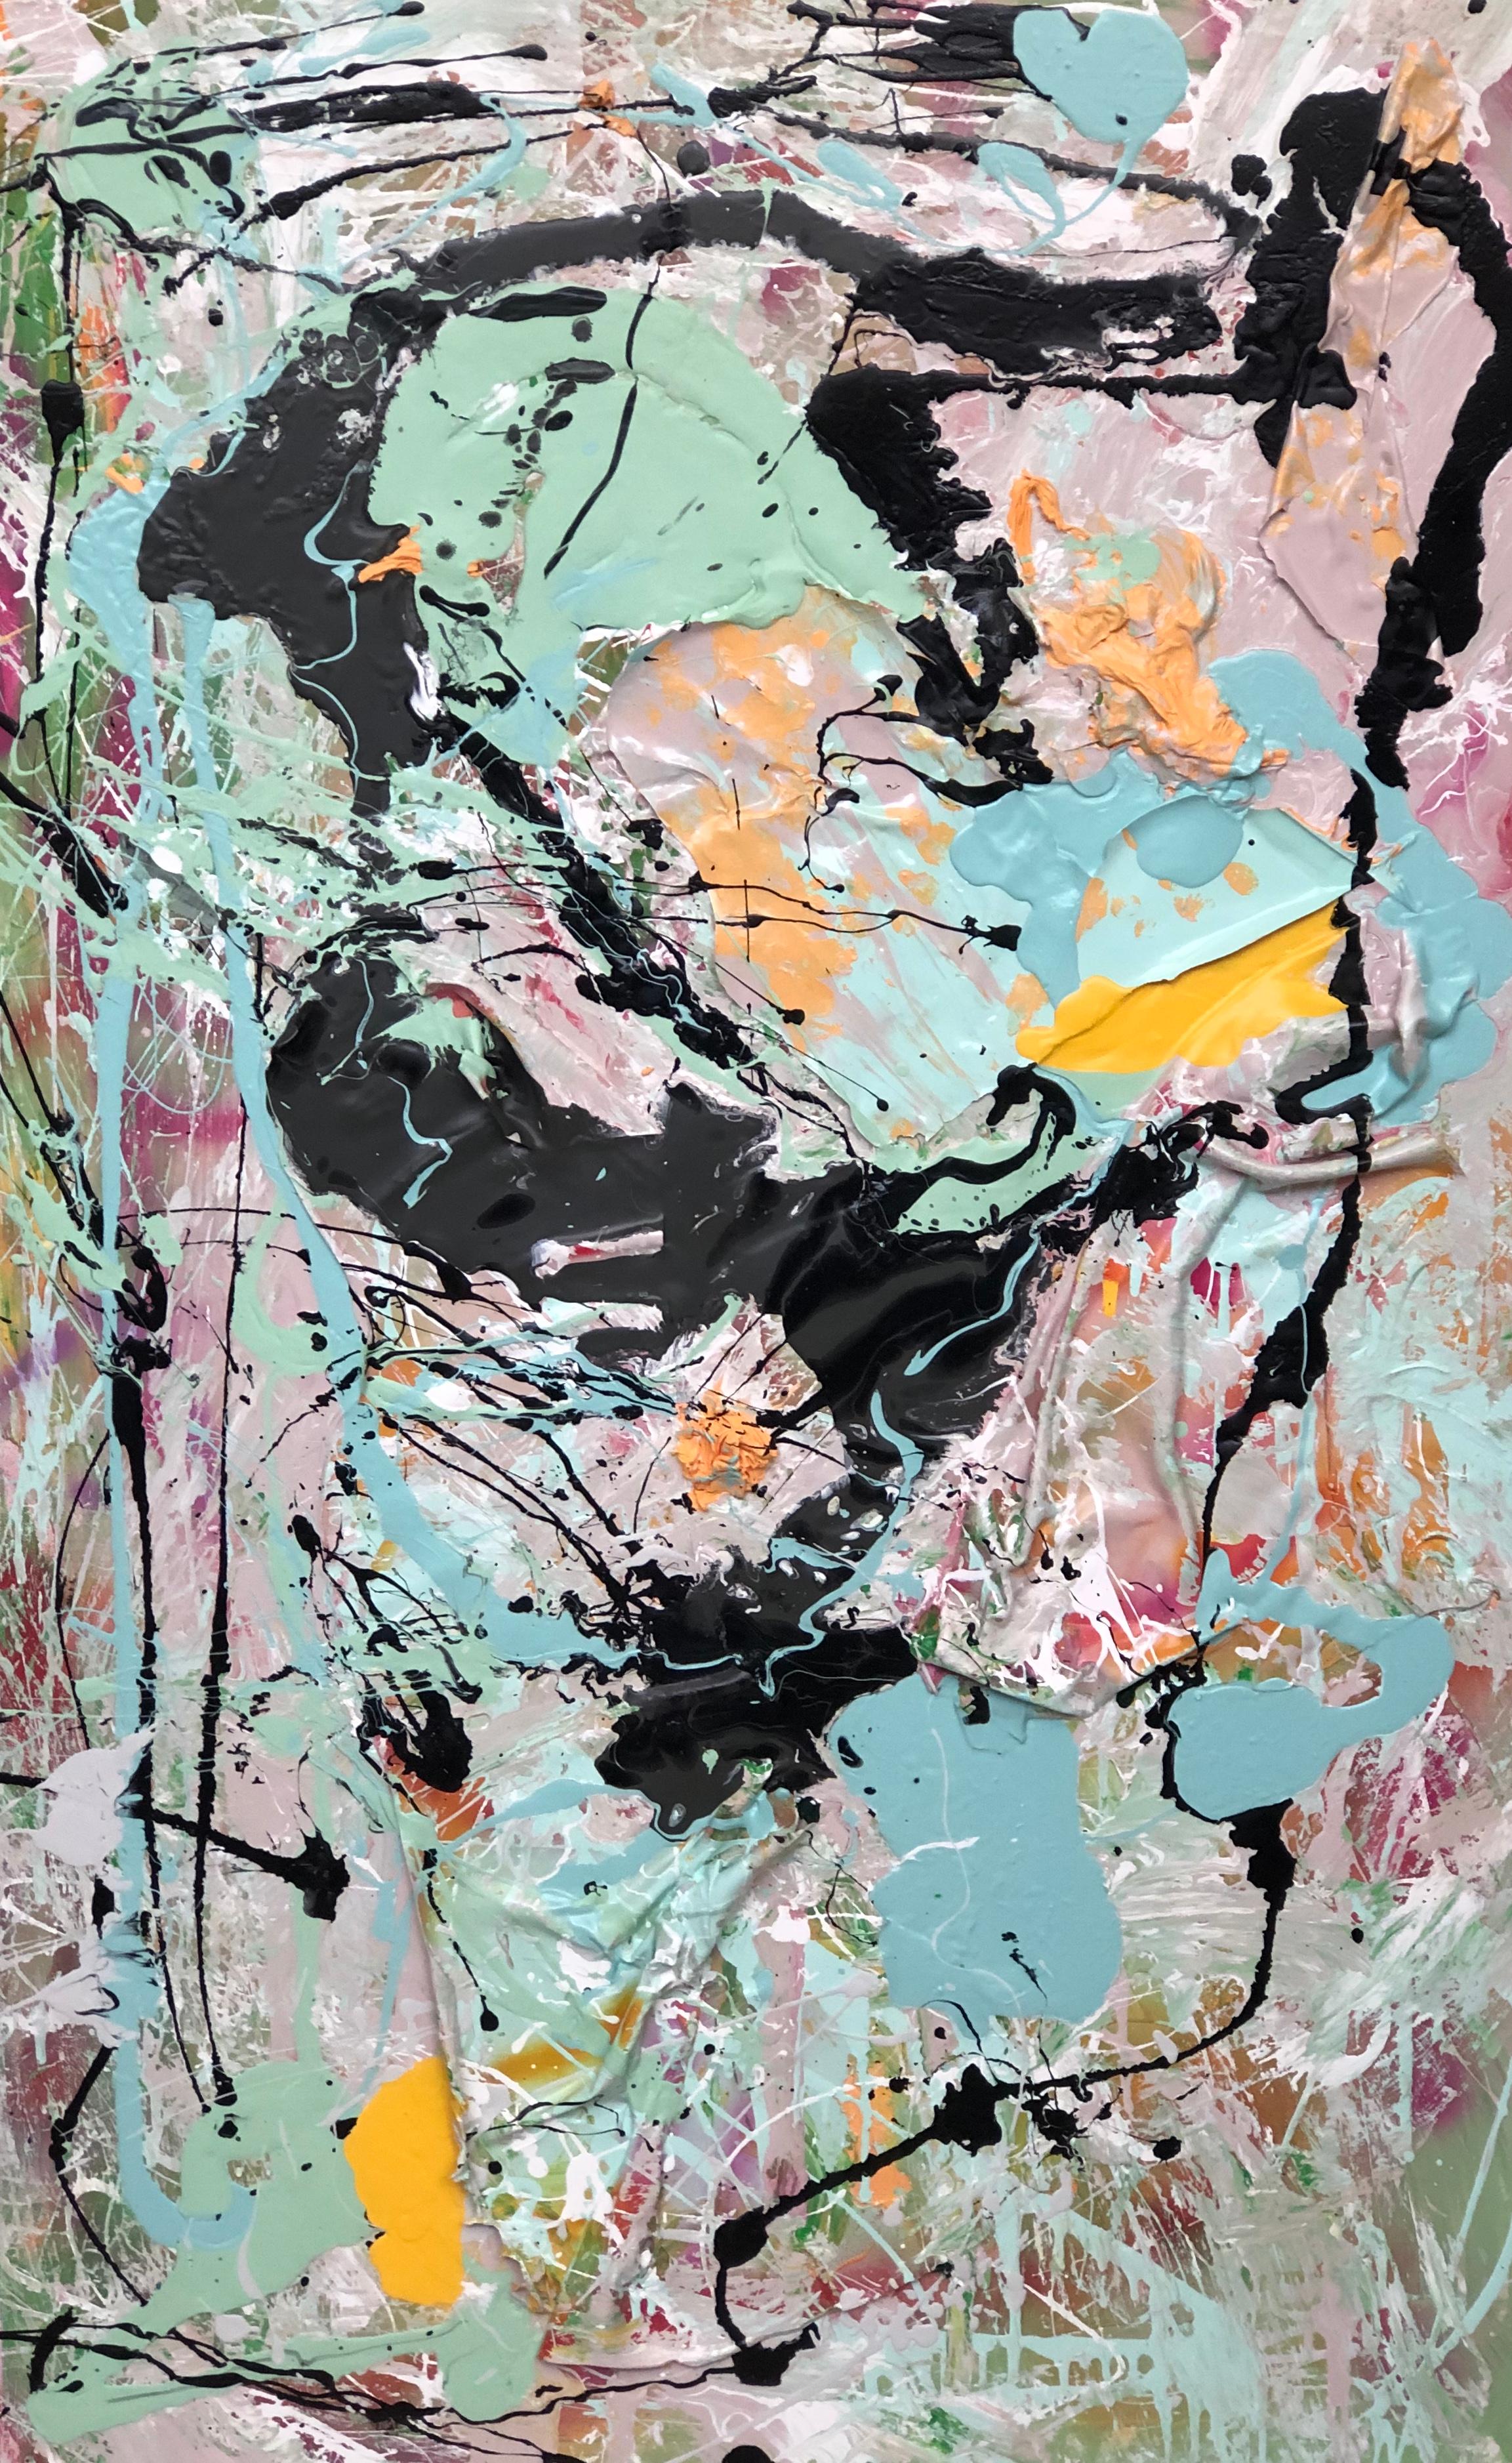 Breakfast at Tiffany's, Original Painting, One of a Kind - Mixed Media Art by Jakob Gold